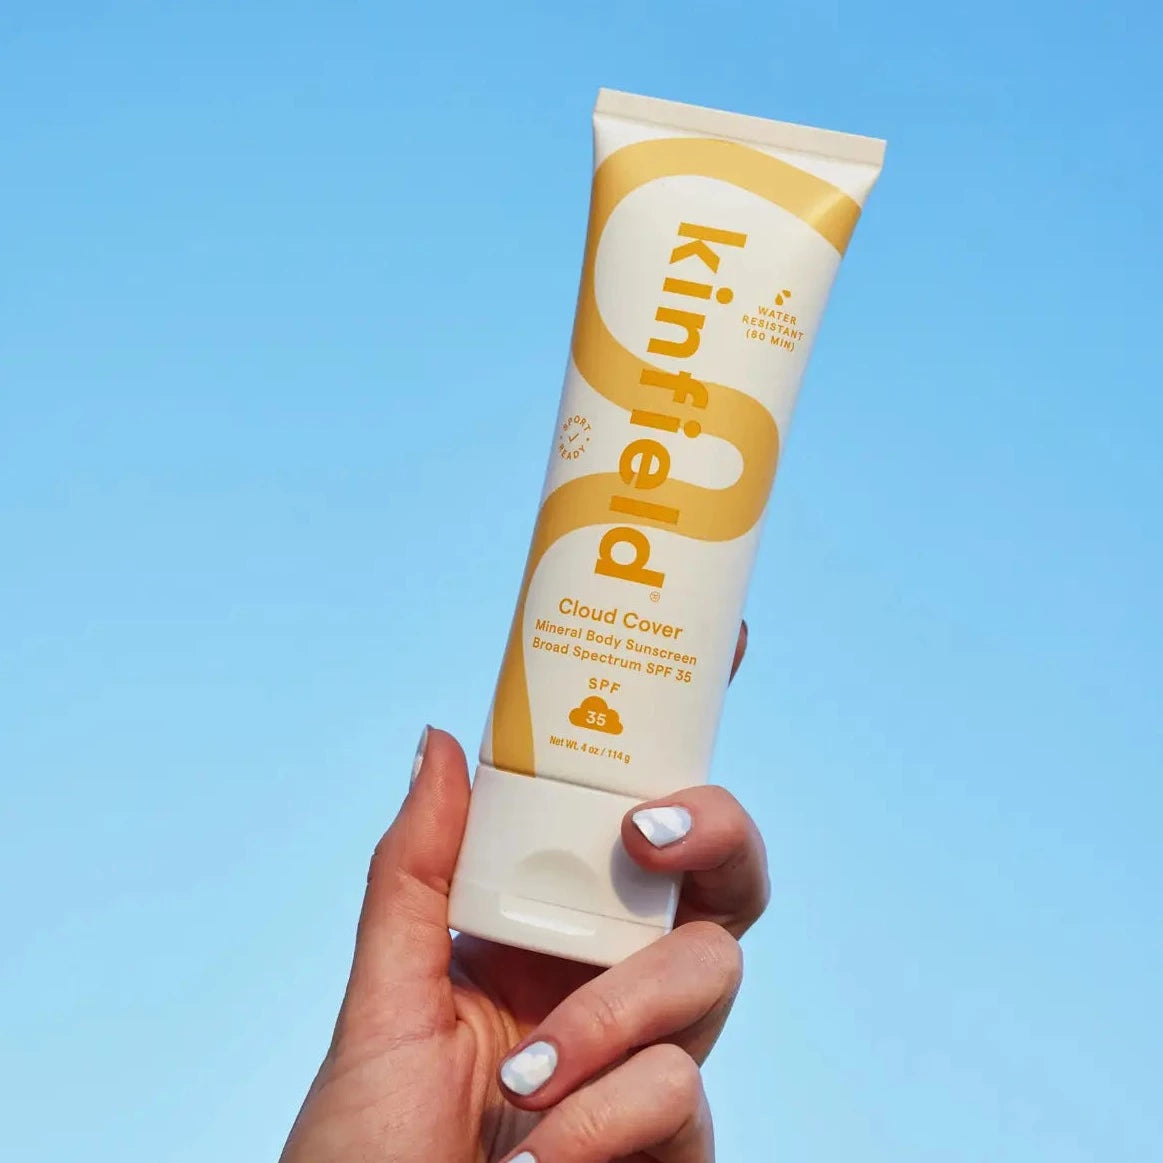 Cloud Cover SPF 35 Mineral Body Sunscreen by Kinfield